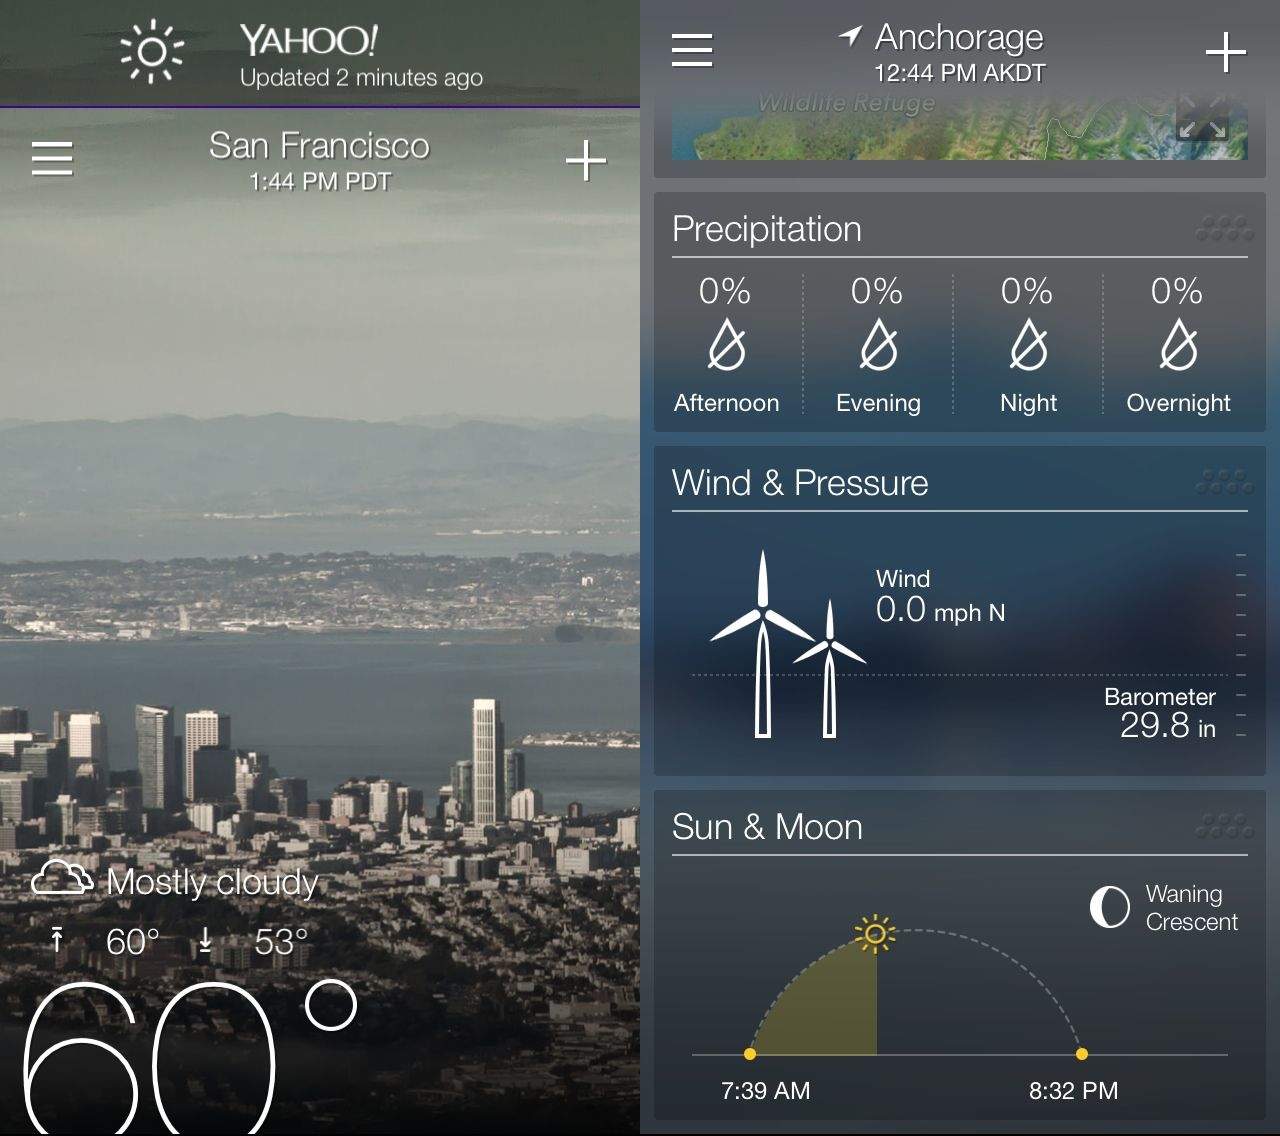 Yahoo! Weather Update Adds Moon Phase Animation, Pull To Refresh, More |  Cult of Mac